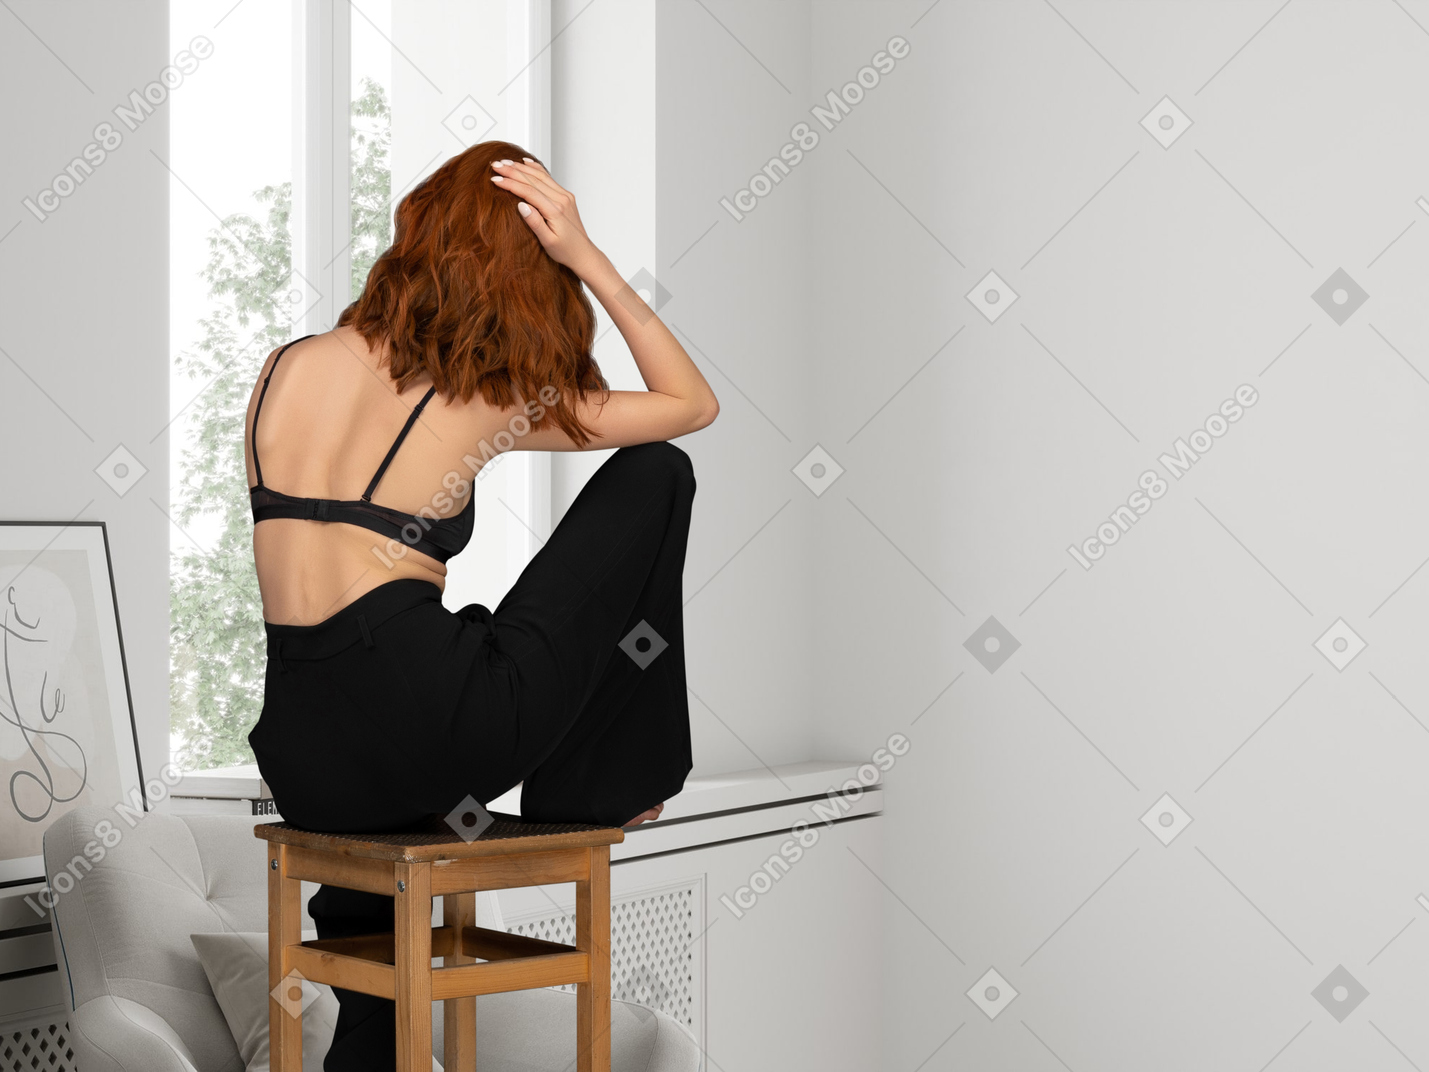 A woman sitting on a chair in a room